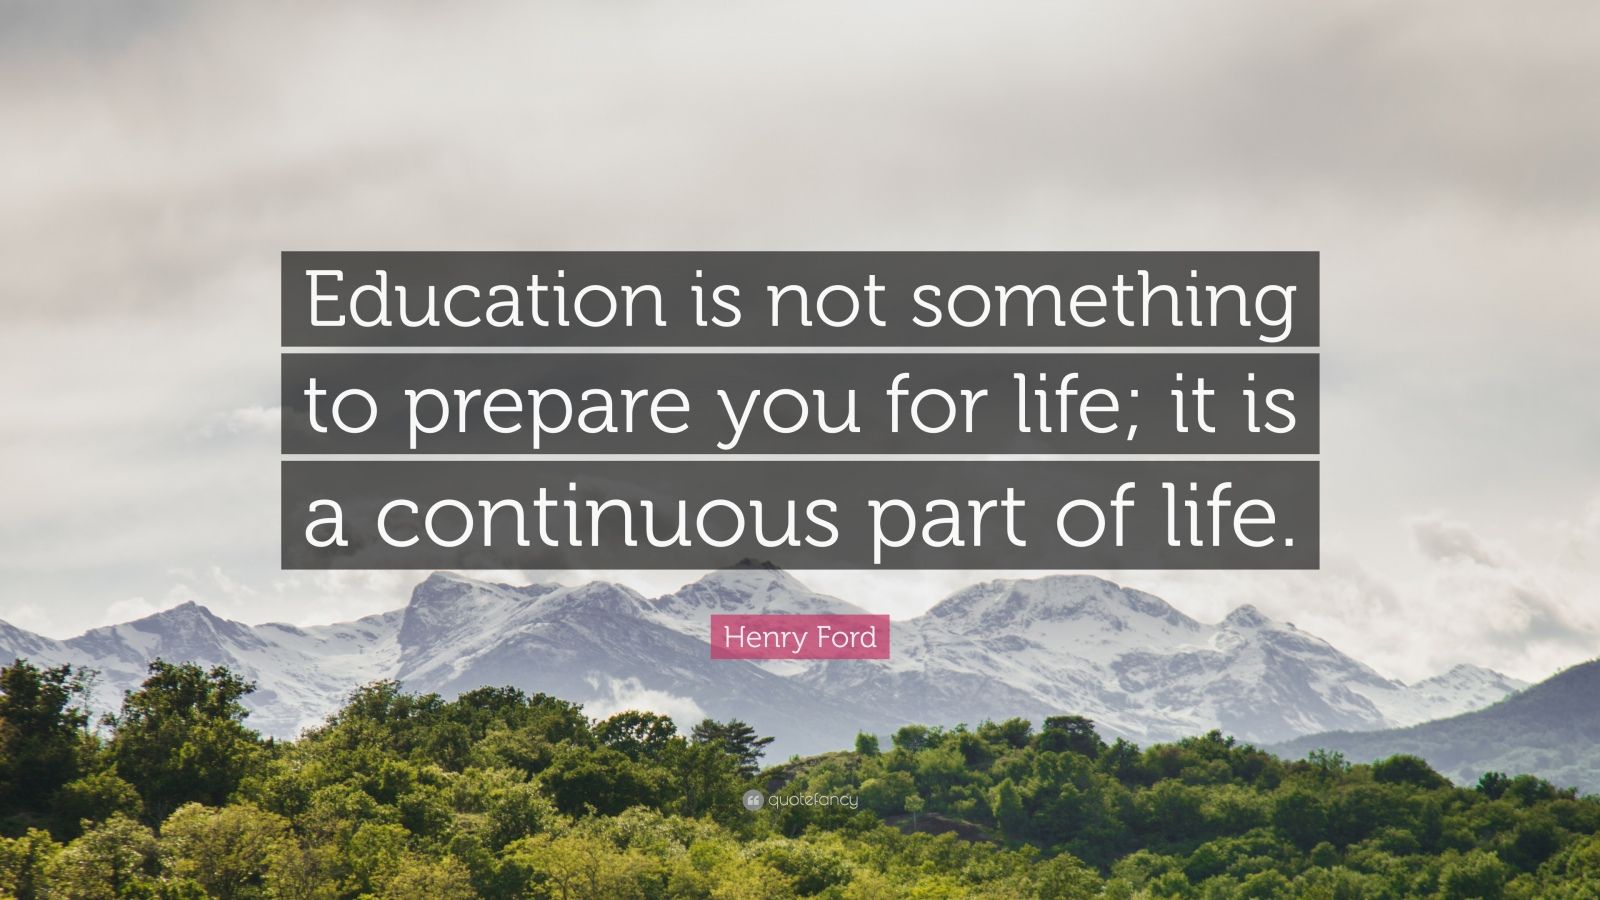 Henry Ford Quote: “Education is not something to prepare you for life ...